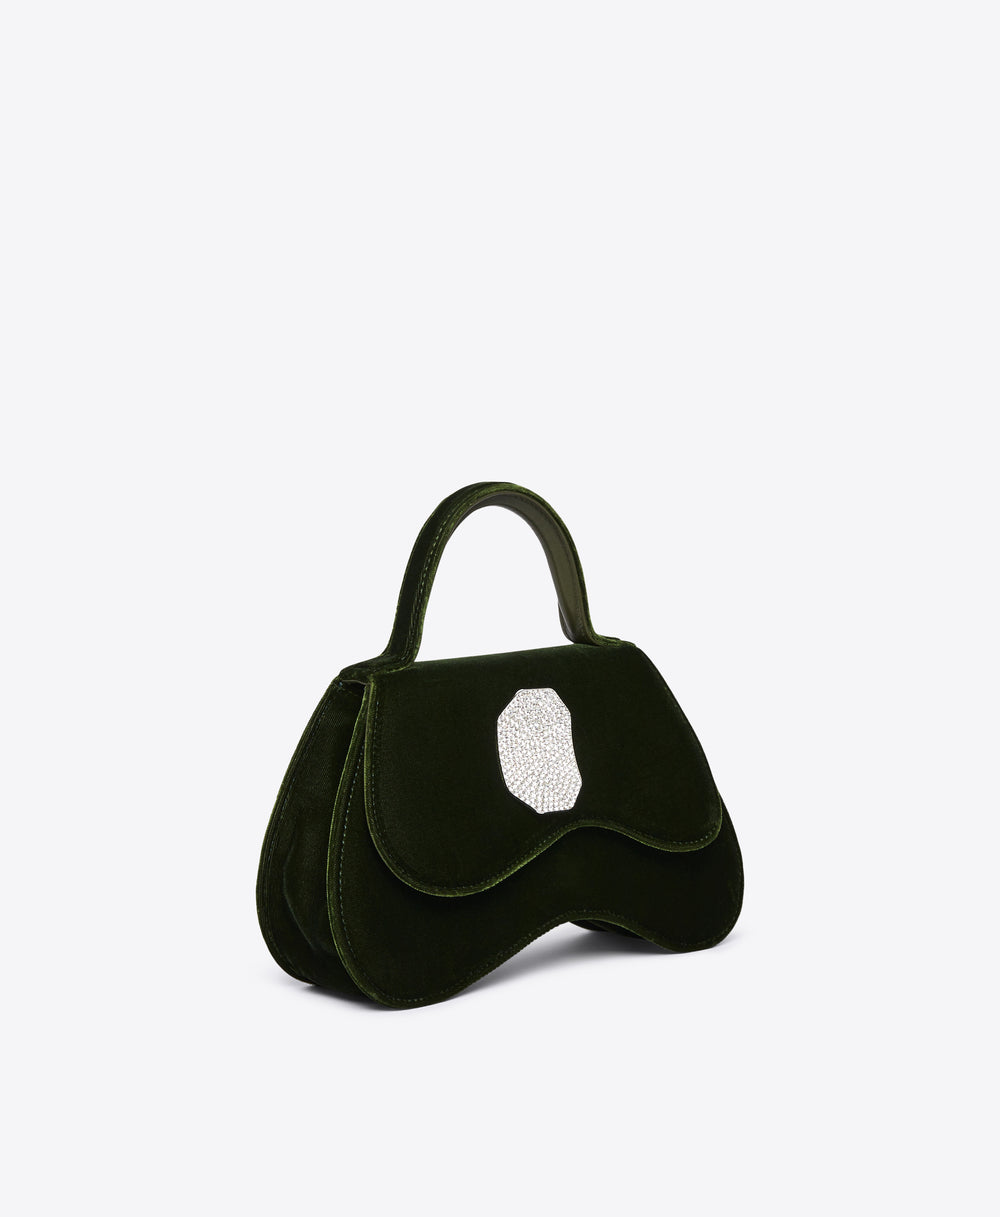 Women's Small Pine Green Velvet Top Handle Bag with Crystal